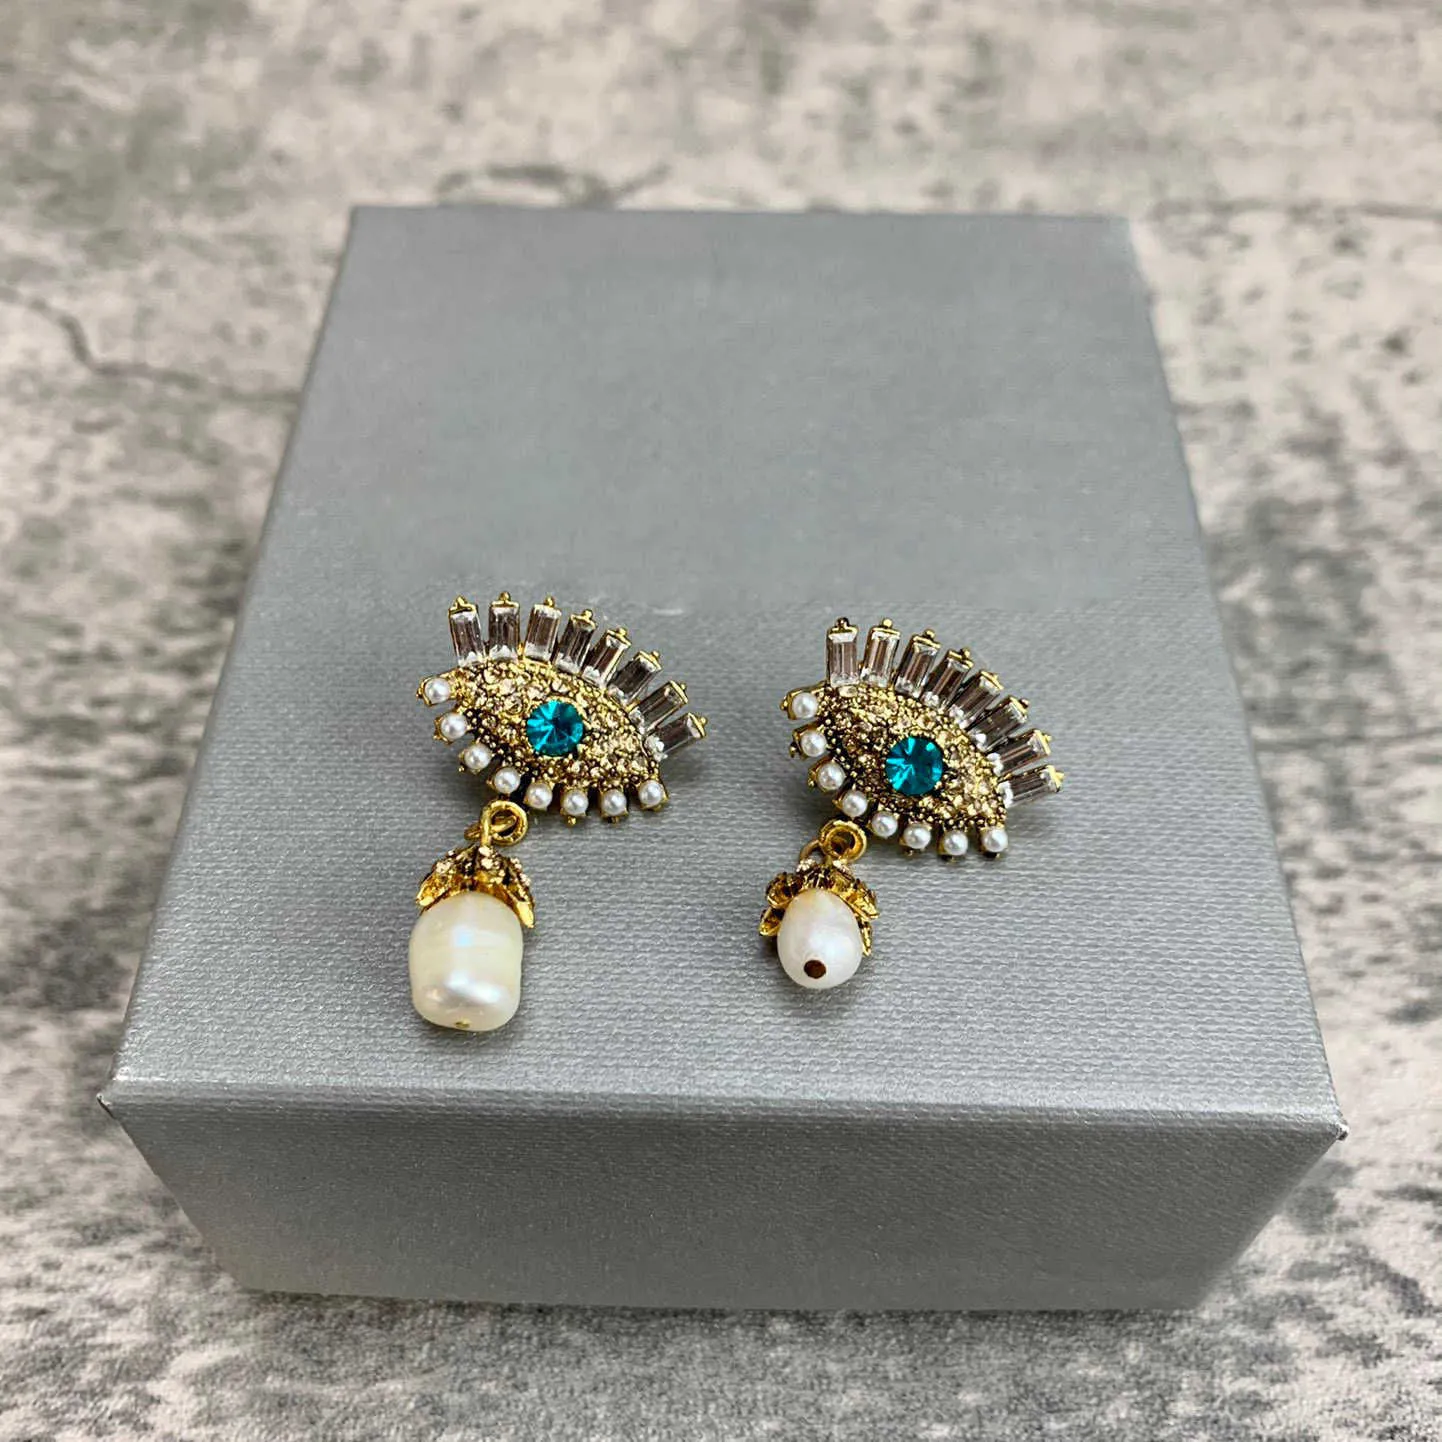 Brand Yellow Gold Color Fashion Jewelry Woman Pearls Earrings Evil Eyes Party High Quality Vintage Drop Pearls Stud Earrings4082186